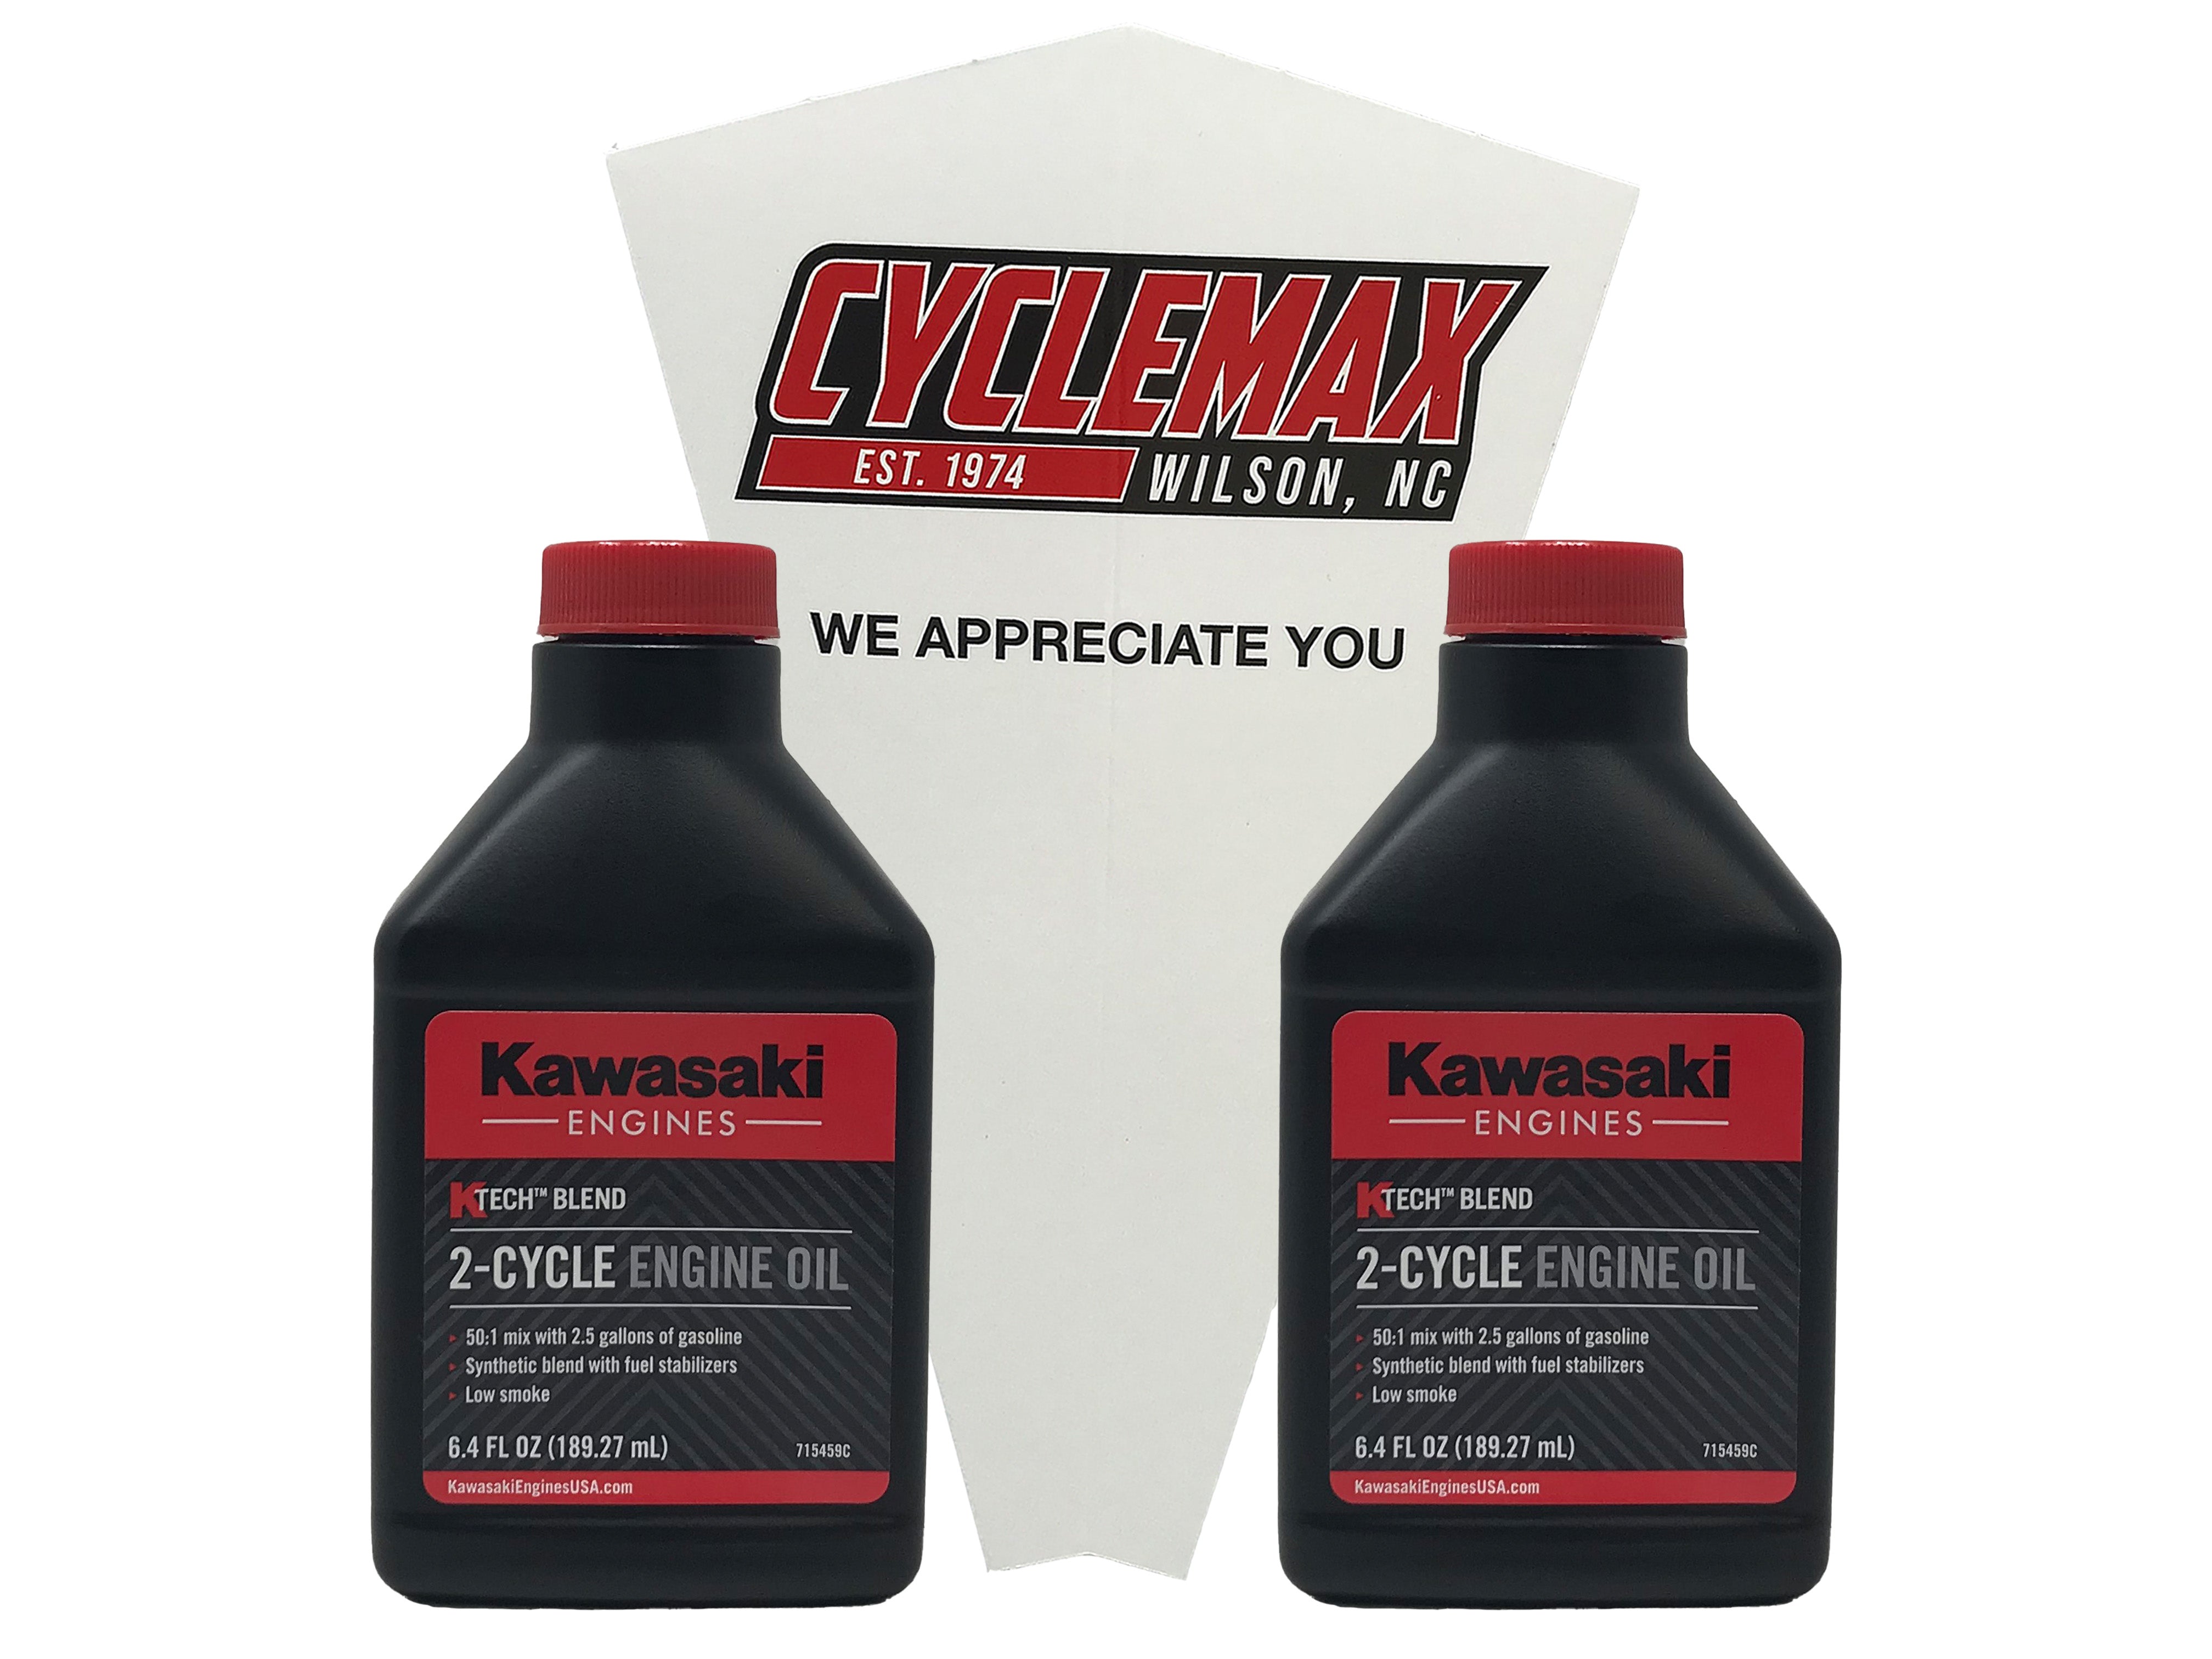 Cyclemax Two Pack of Kawasaki KTech 2-Cycle Two Stroke Engine Oil 6.4oz 99969-6084 Contains Two Bottles and a Funnel